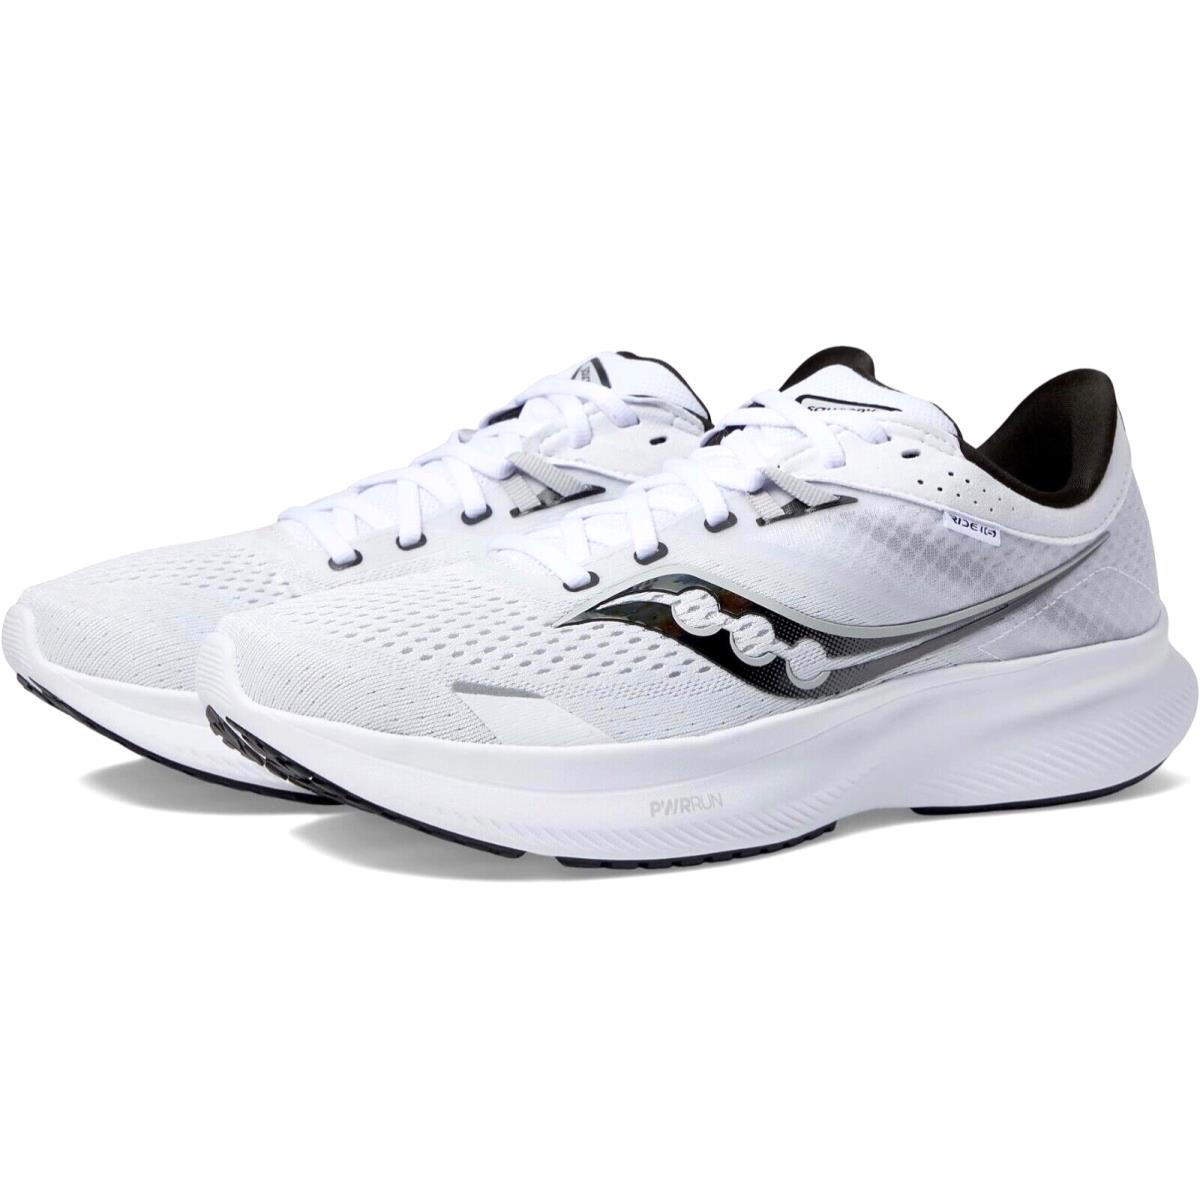 Saucony Men`s Ride 16 Size 10.5 Running Shoes White/black S20830-11